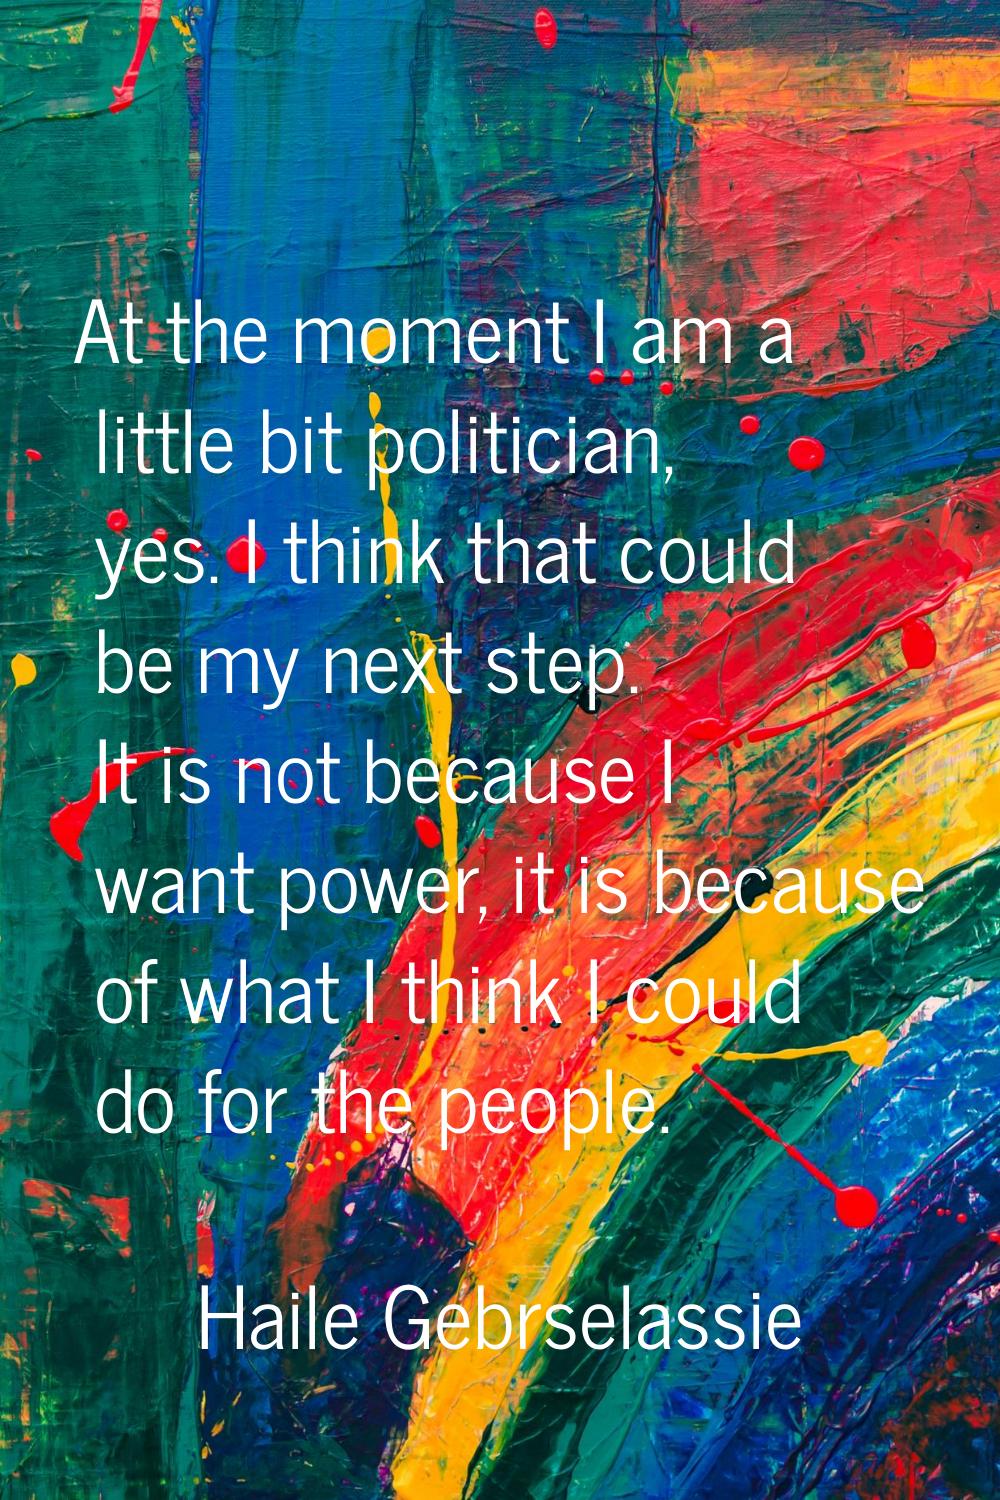 At the moment I am a little bit politician, yes. I think that could be my next step. It is not beca